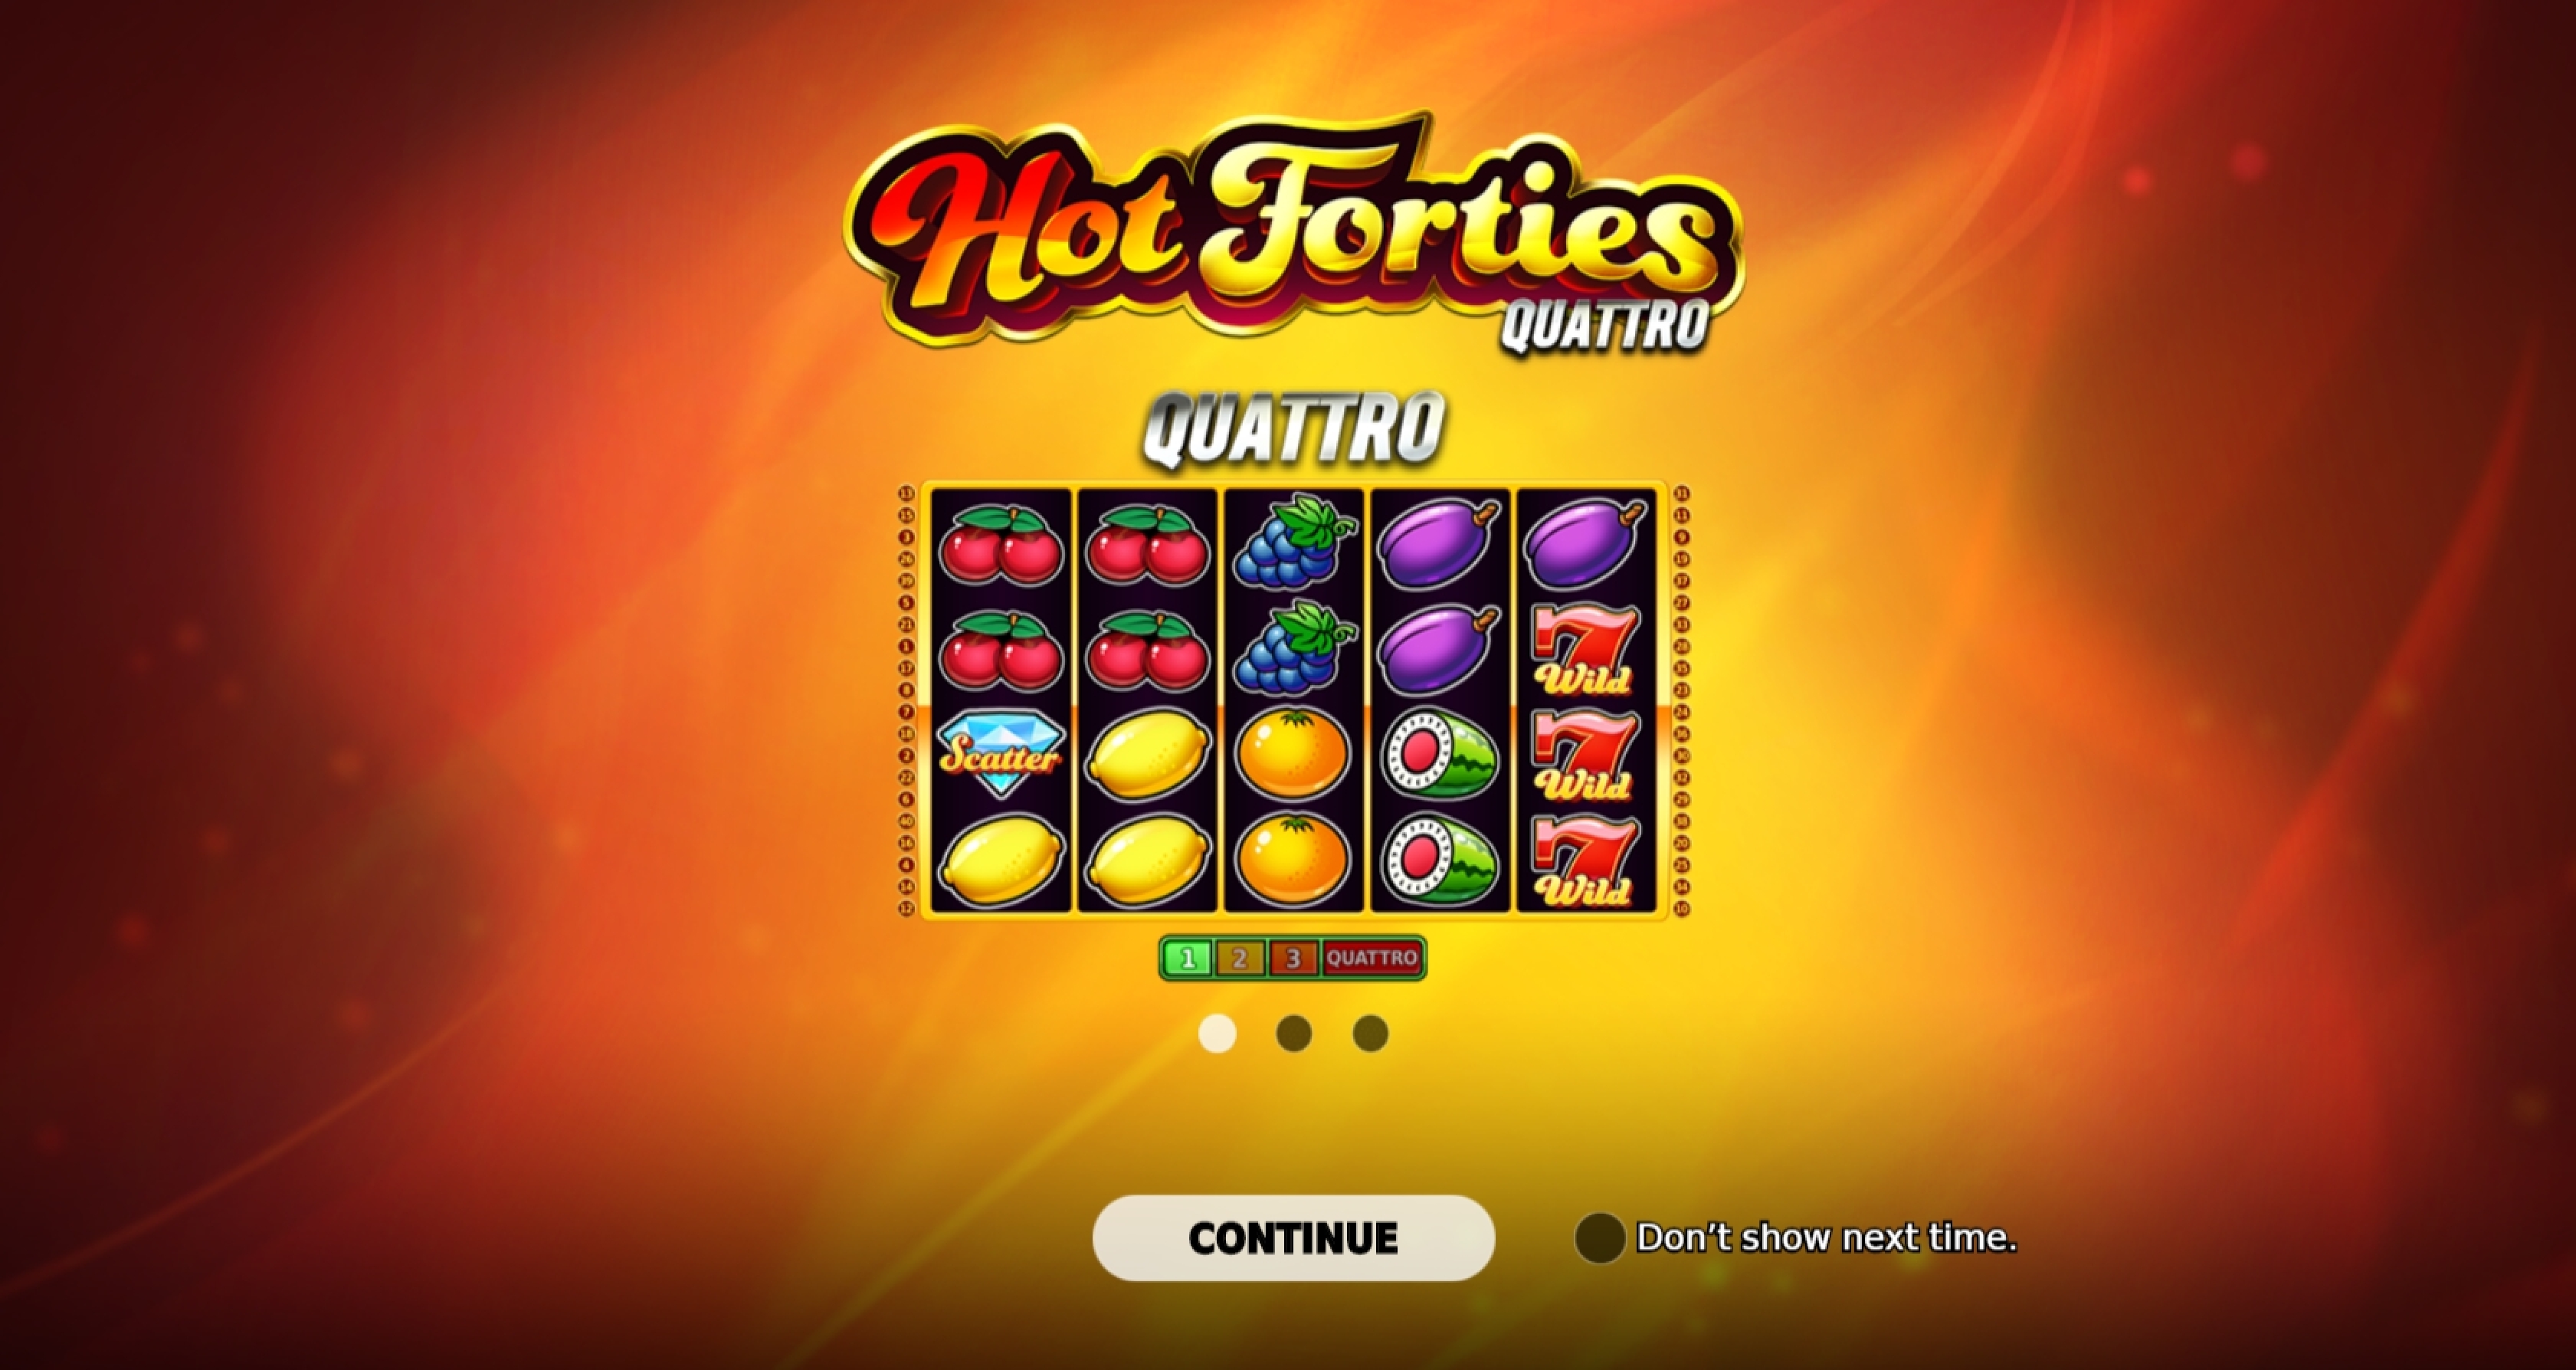 Play Hot Forties Quattro Free Casino Slot Game by Stakelogic